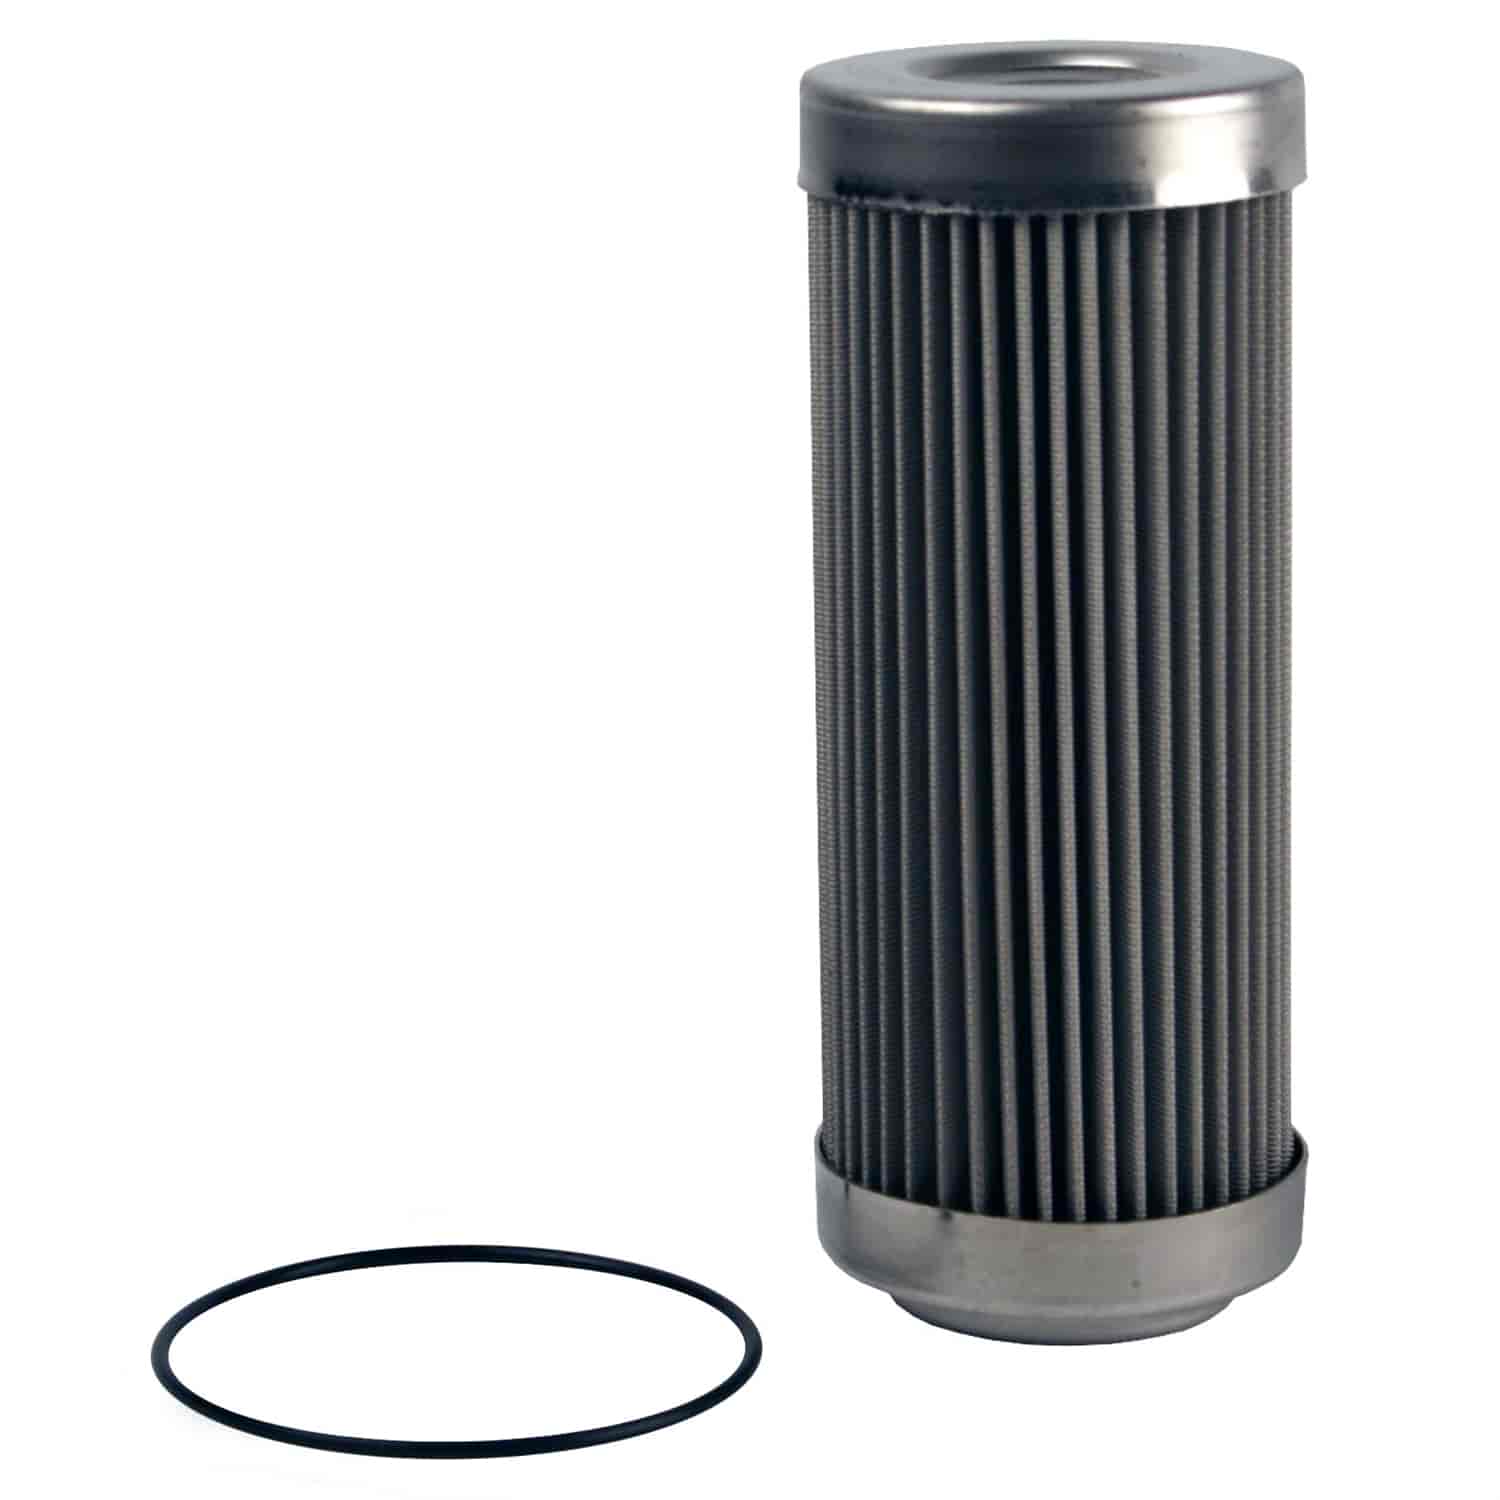 Replacement Fuel Filter Element 40 micron for part #027-12342/12343